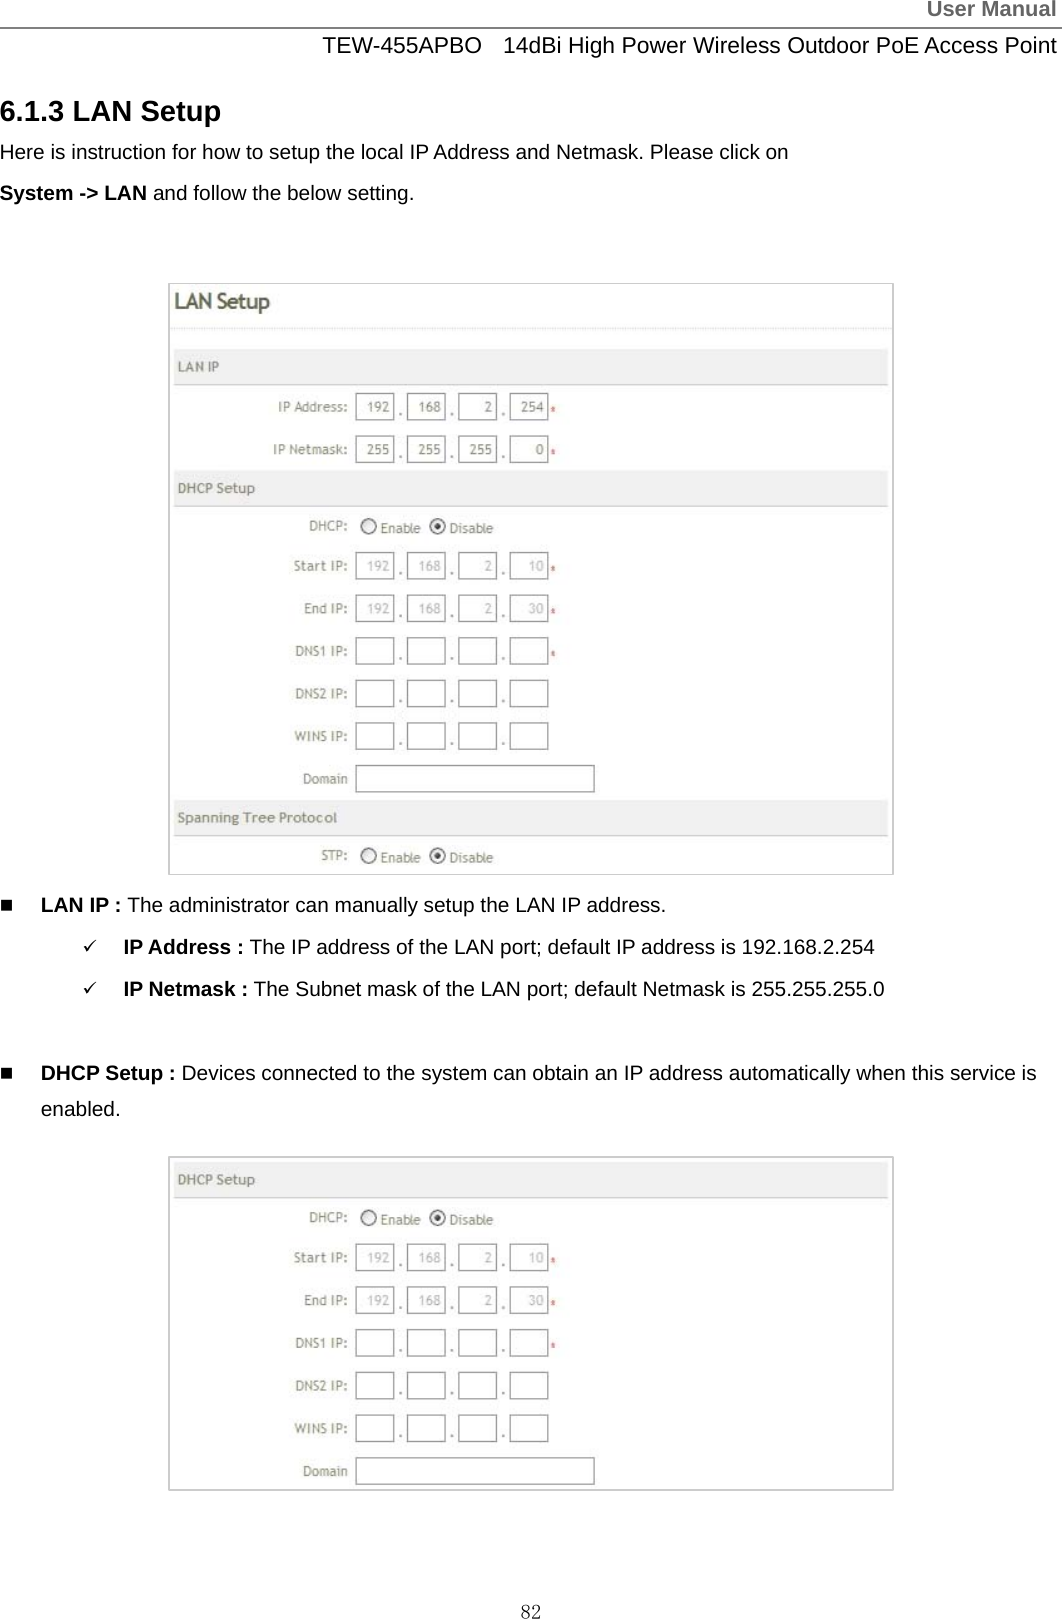 User ManualTEW-455APBO  14dBi High Power Wireless Outdoor PoE Access Point 82 6.1.3 LAN Setup Here is instruction for how to setup the local IP Address and Netmask. Please click on   System -&gt; LAN and follow the below setting.                  LAN IP : The administrator can manually setup the LAN IP address. 9 IP Address : The IP address of the LAN port; default IP address is 192.168.2.254 9 IP Netmask : The Subnet mask of the LAN port; default Netmask is 255.255.255.0   DHCP Setup : Devices connected to the system can obtain an IP address automatically when this service is enabled.           